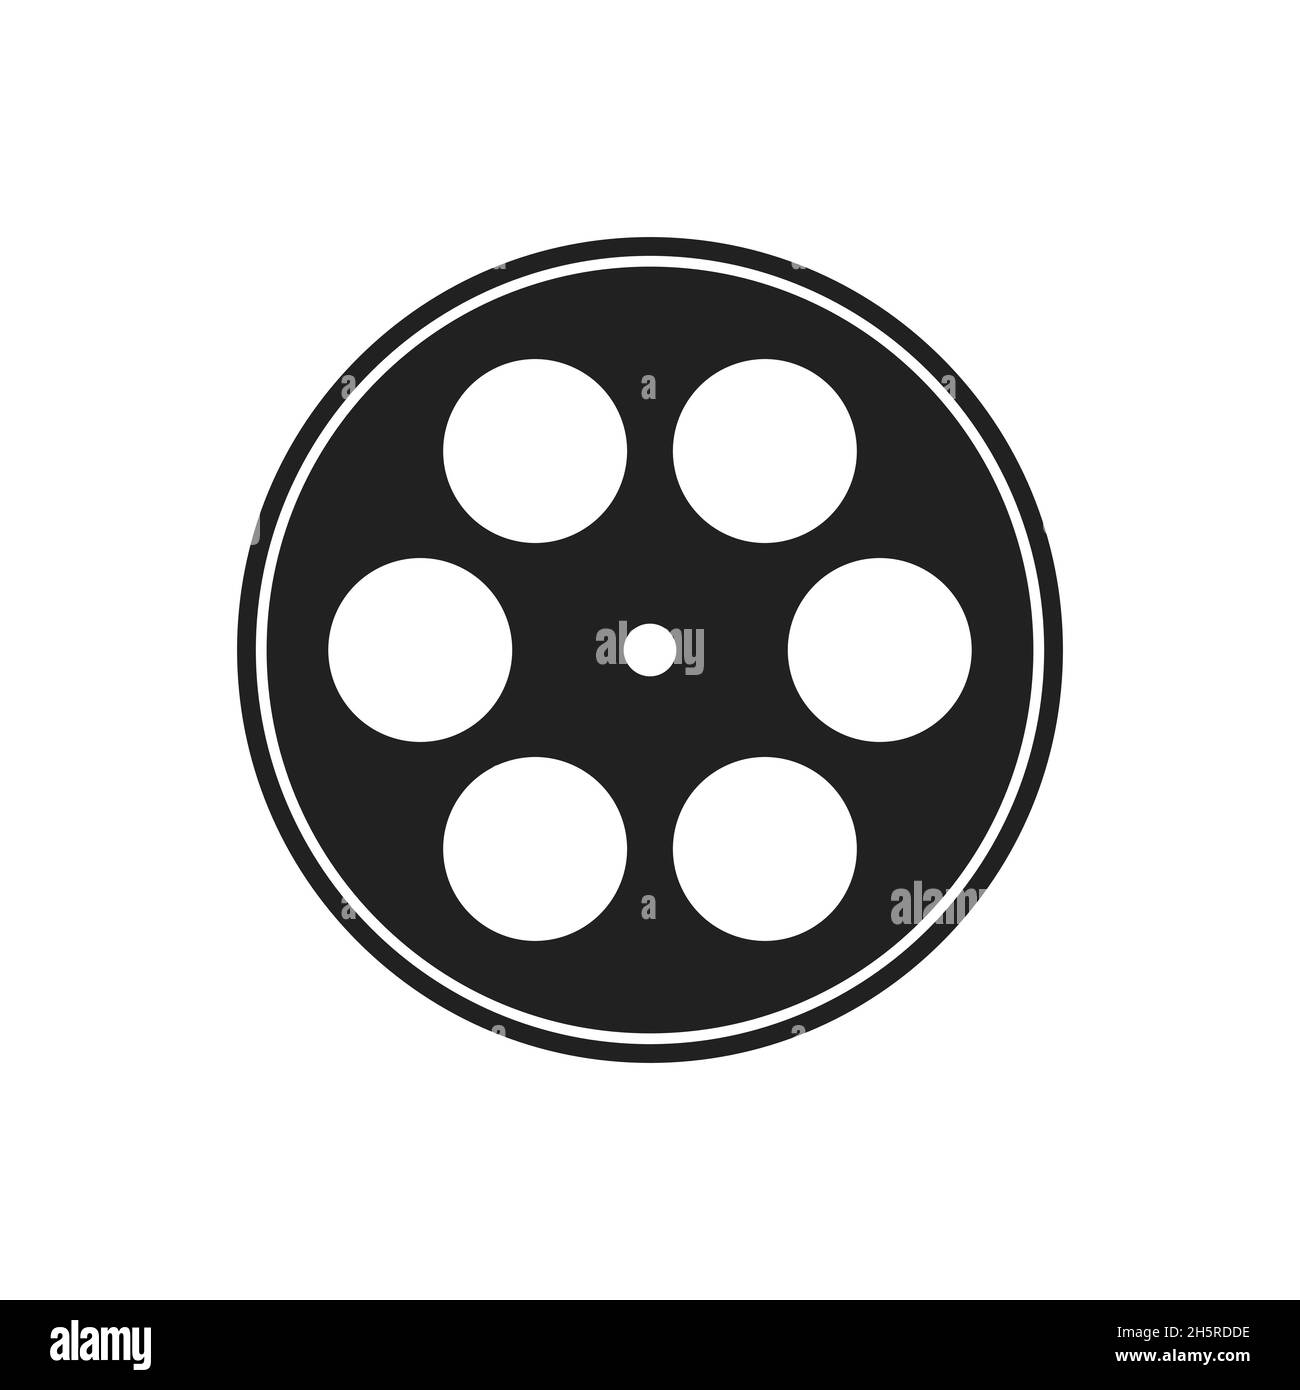 Vintage illustration with reel movie icon on white background. Vector movie illustration Stock Vector